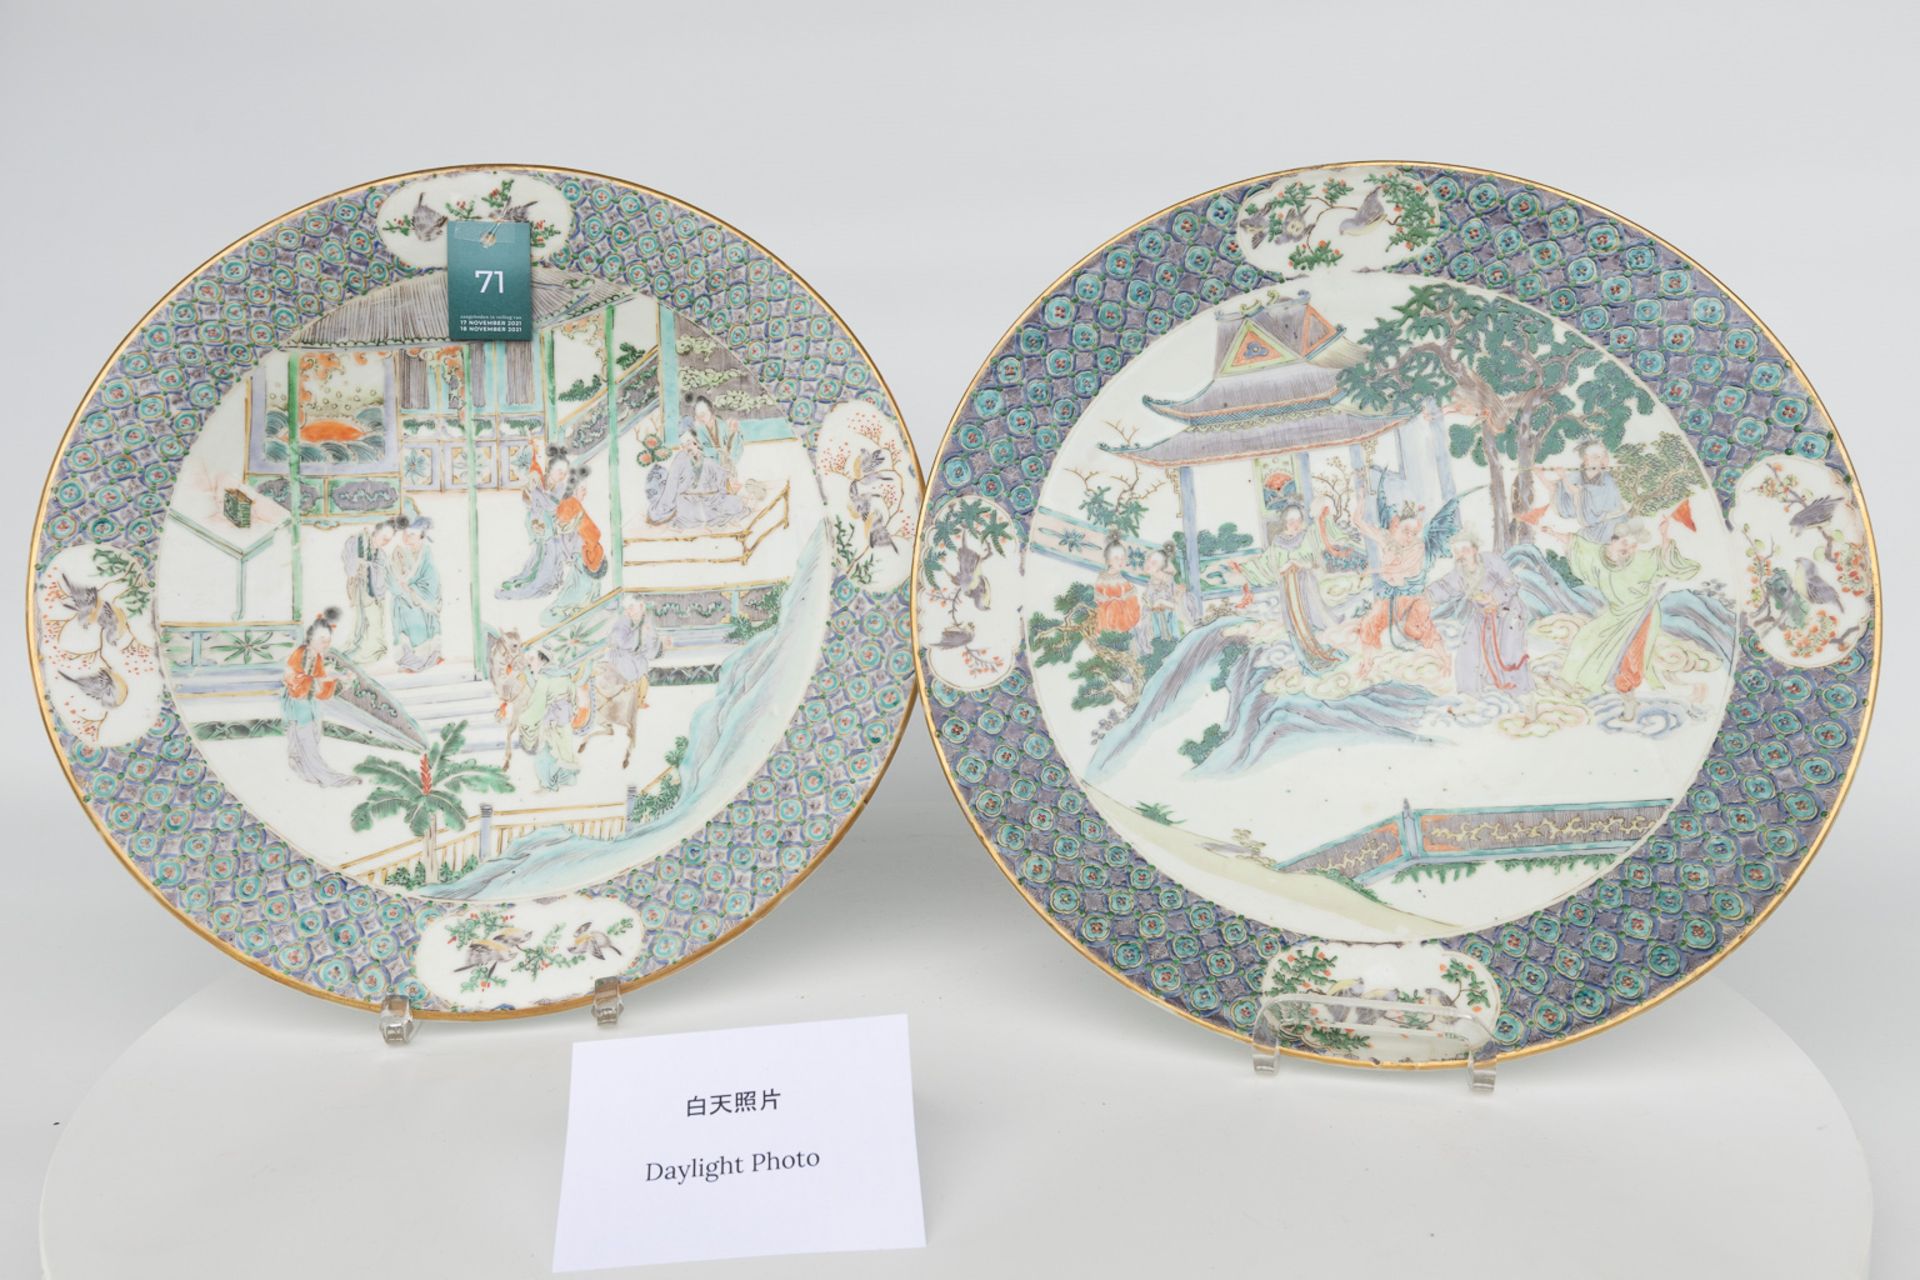 A pair of plates made of Chinese porcelain in Kanton style. 19th century. - Image 24 of 24